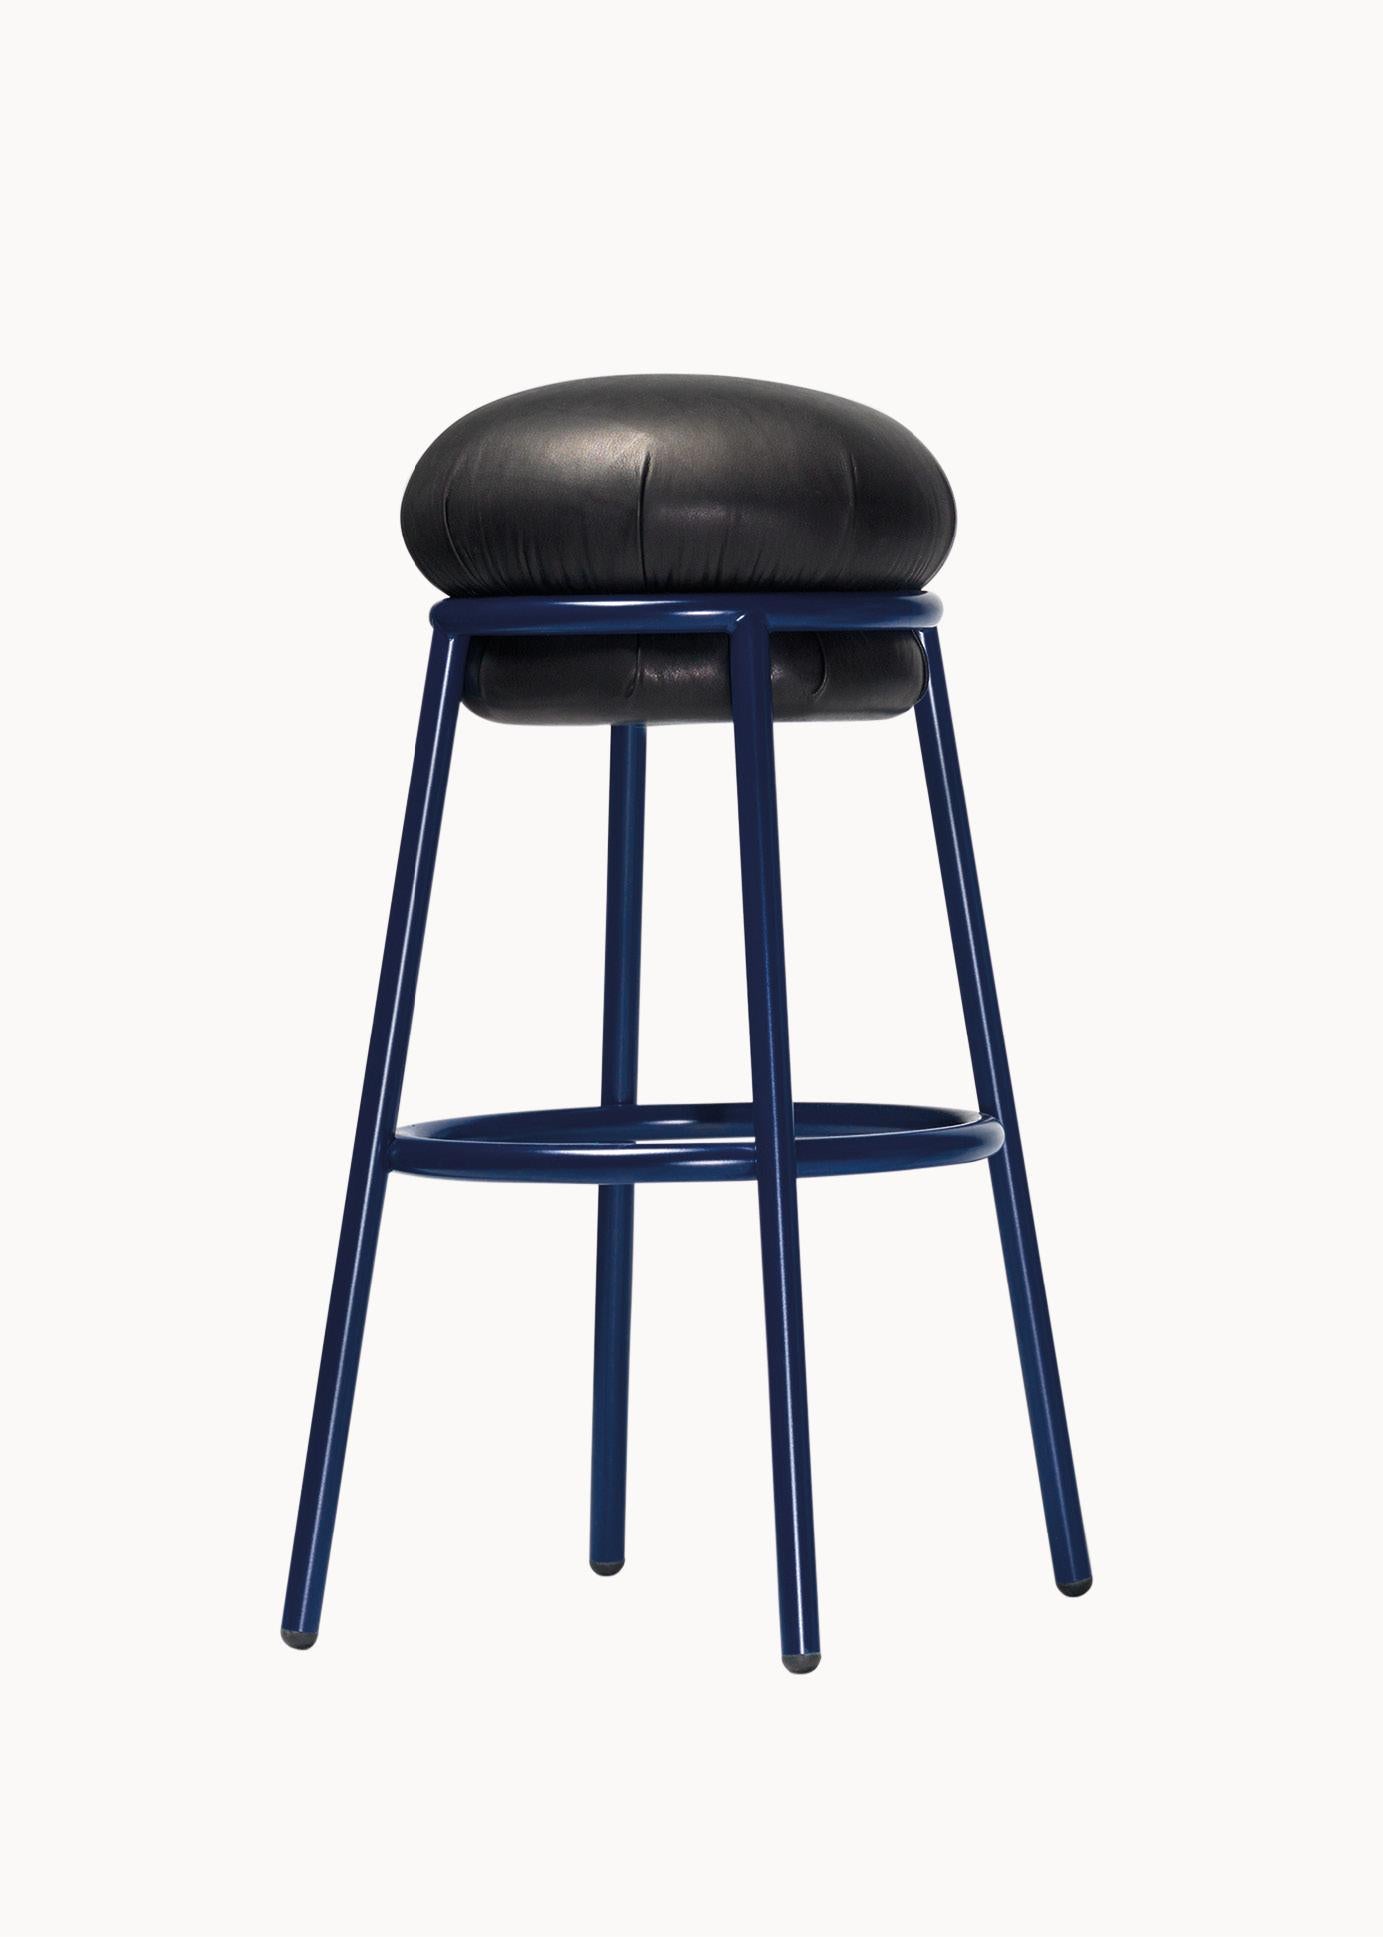 'Grasso' by Stephen Burks x Bd Barcelona

Footstool:
Ø36 x 80 cm

Upholstery ref: Florida Leather Black
Frame: Blue

An stool that pursues a visual “ultra-comfort”, and invites you to sit on it. The leather upholstery oozes over the bare iron